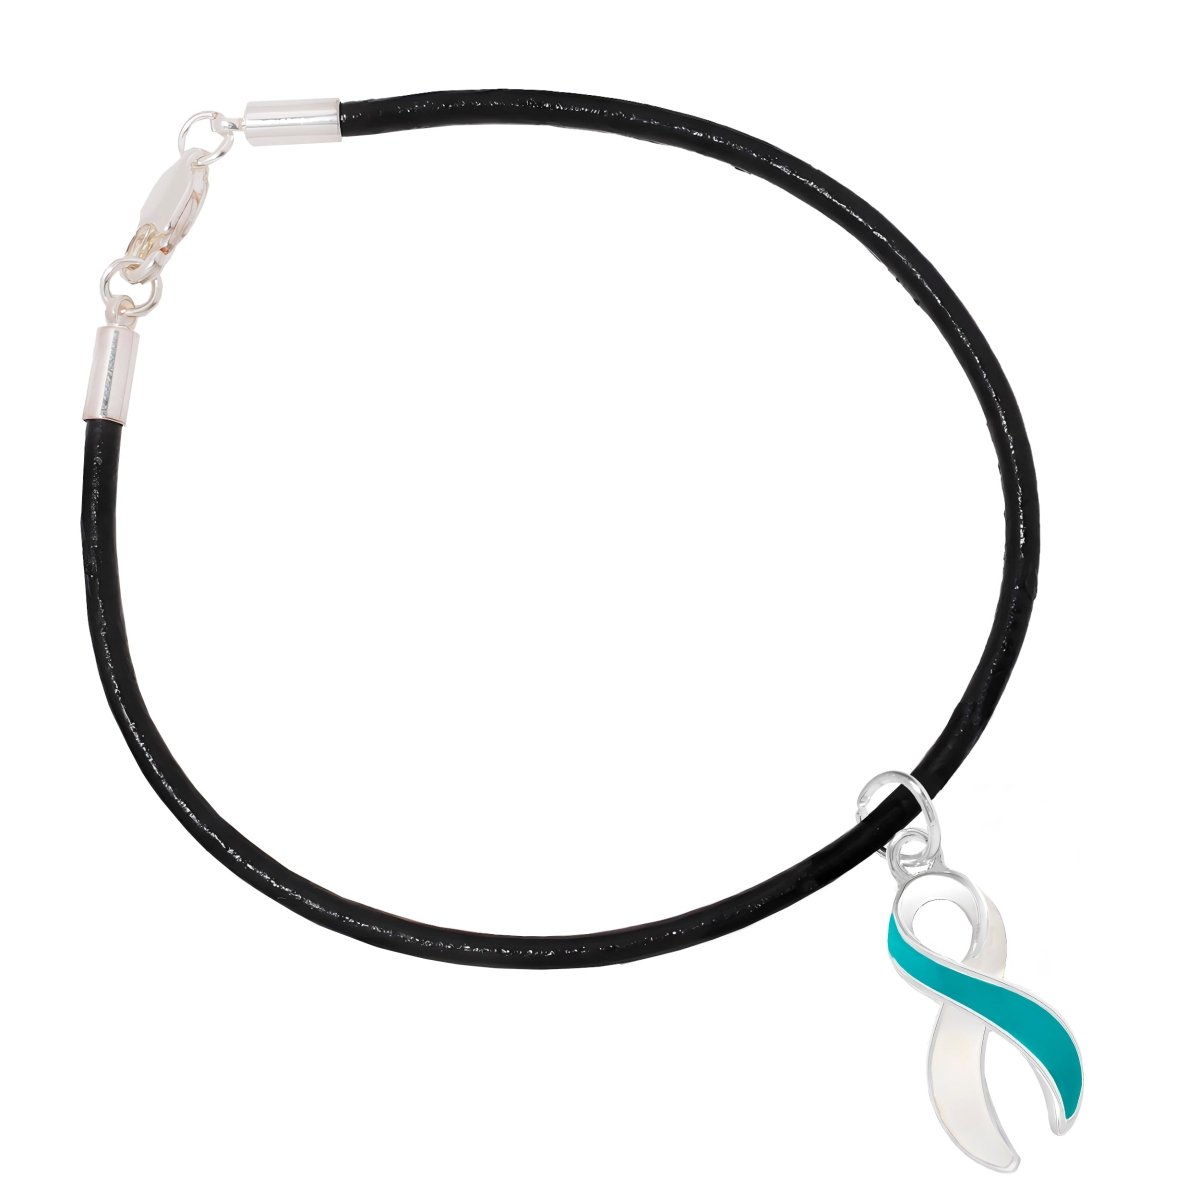 Large Teal & White Awareness Ribbon Black Cord Bracelets - Fundraising For A Cause